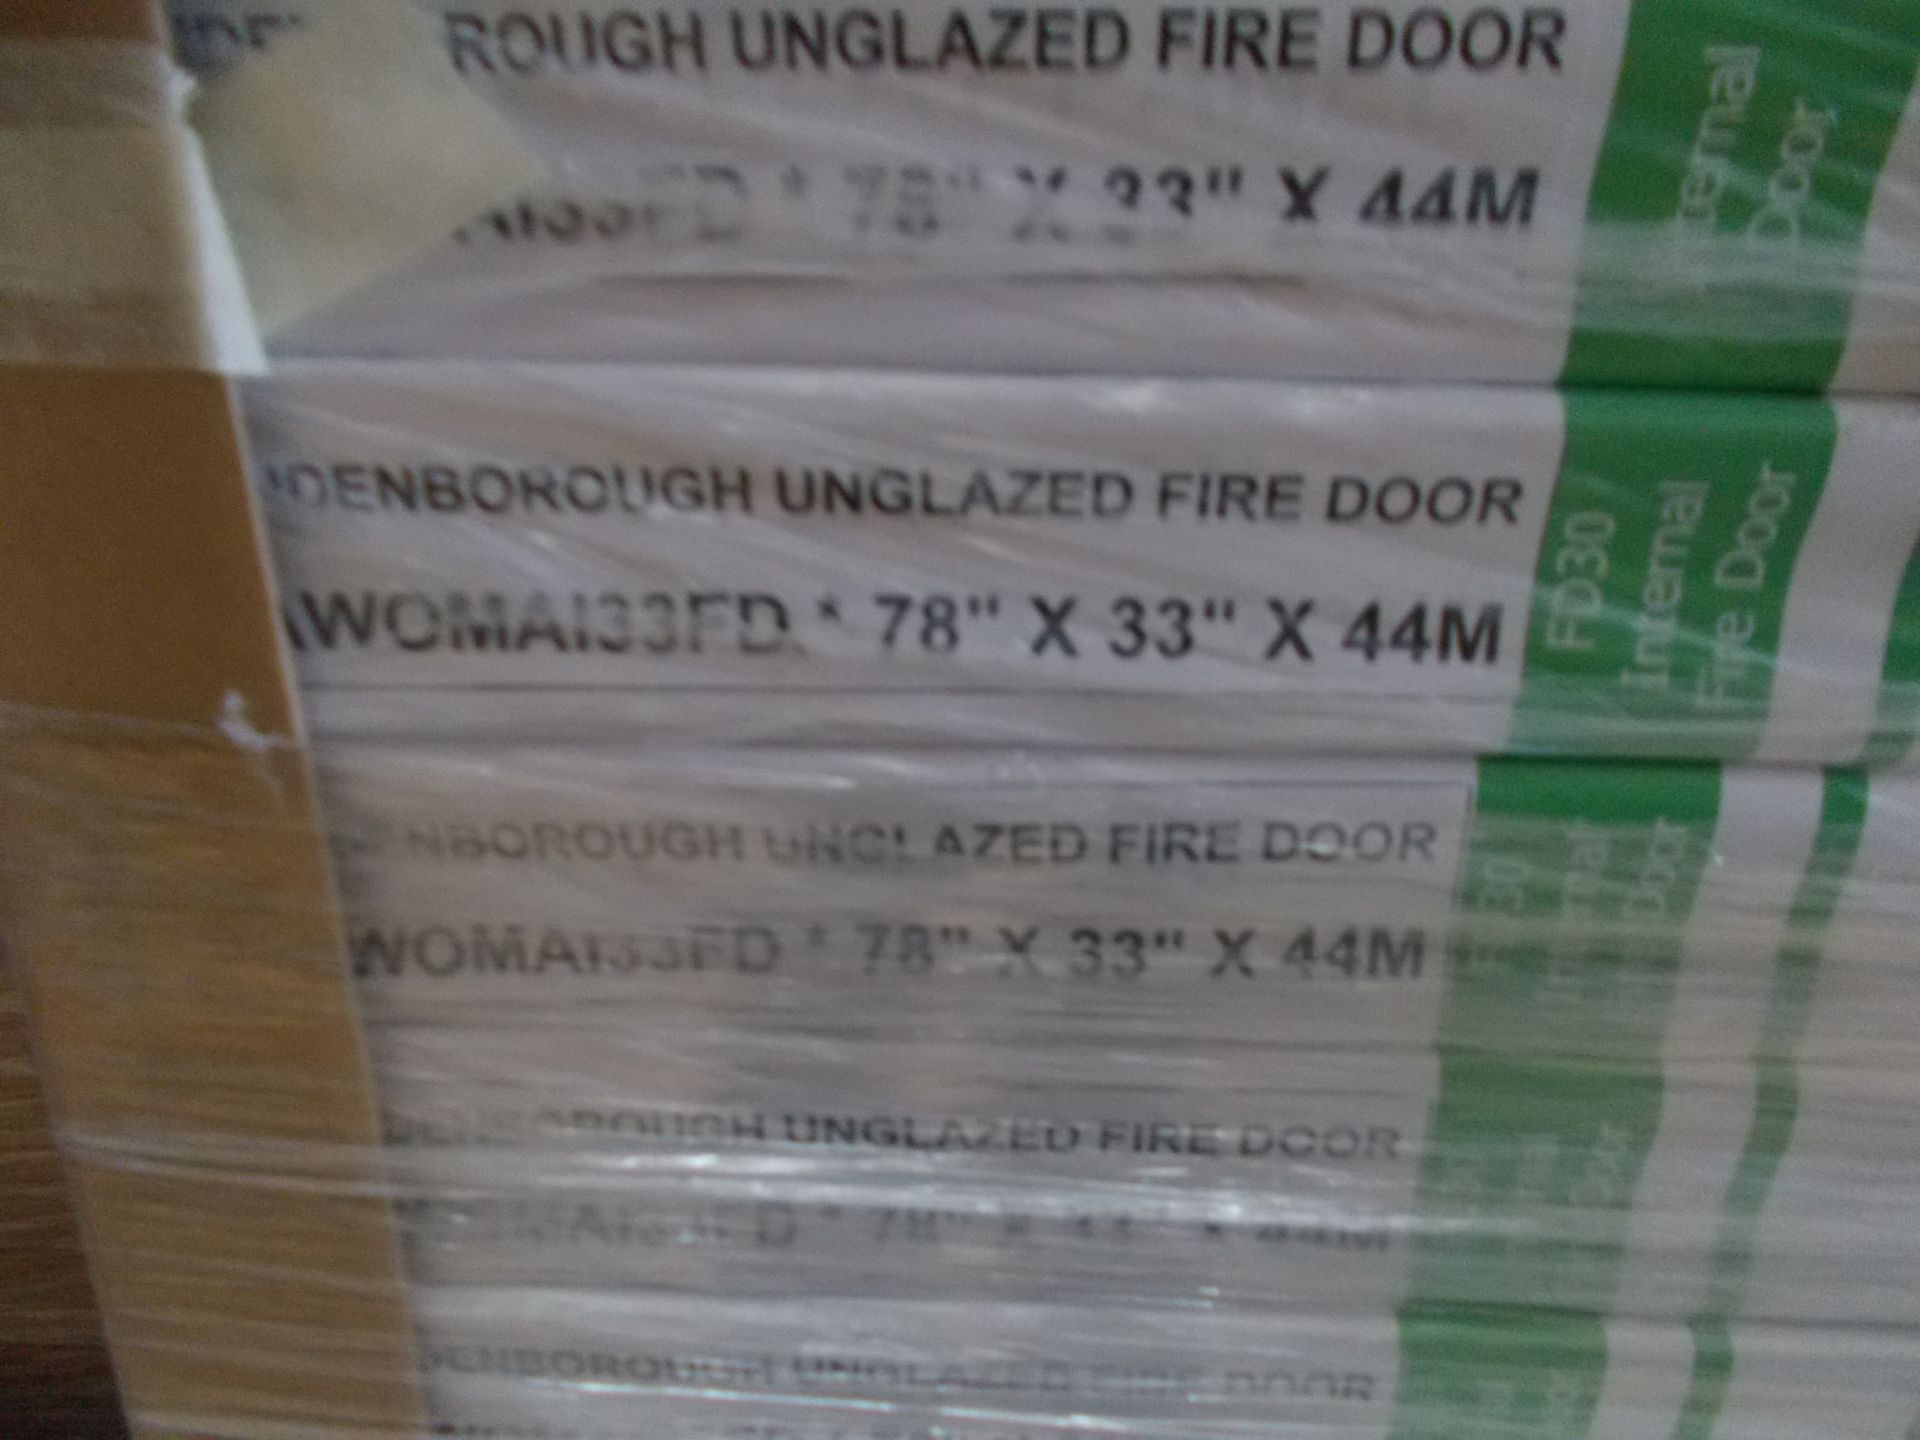 2 x Maidenborough Unglazed Fire Door AWOMA133FD 78”x33”x44mm - Lots to be handed out in order they - Image 4 of 4